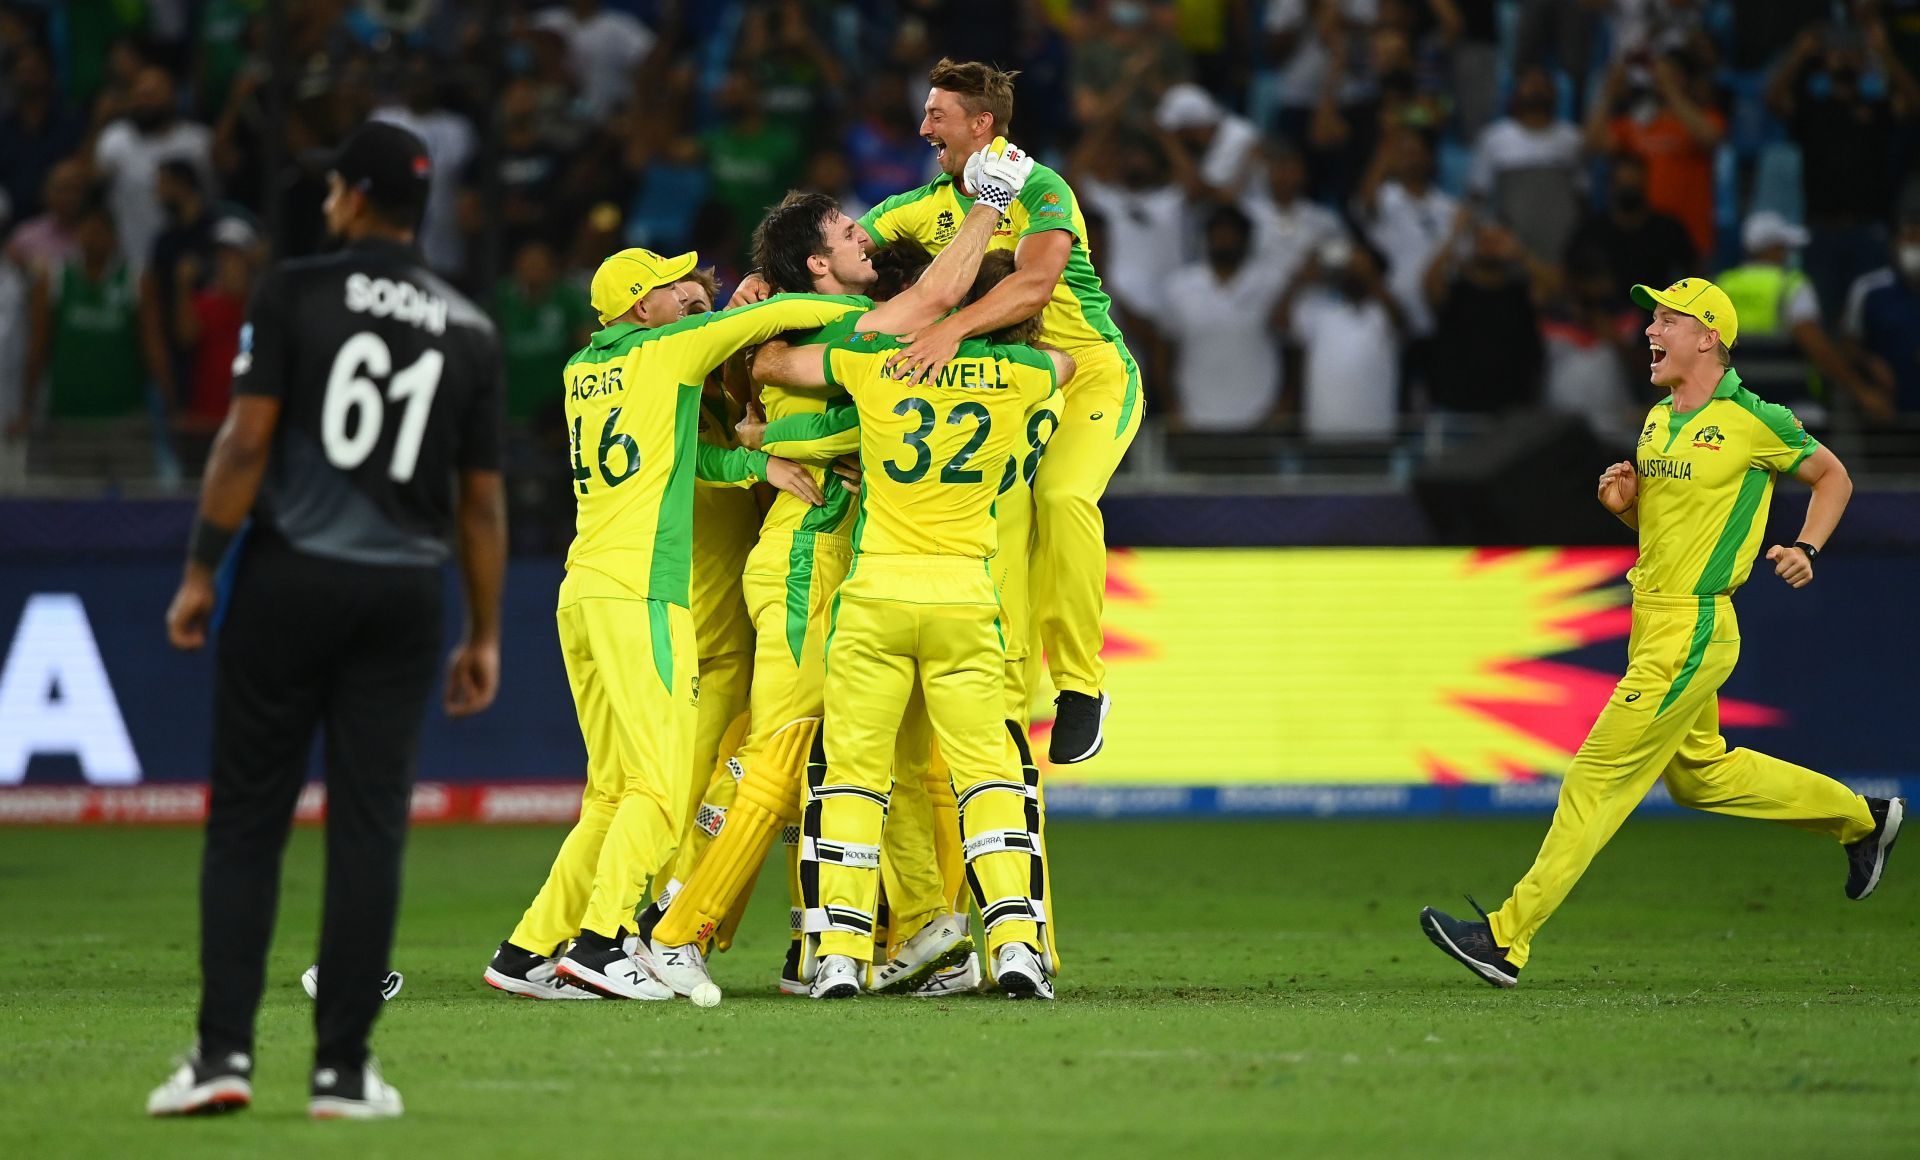 Australia celebrate after winning T20 World Cup 2021. Pic: Getty Images